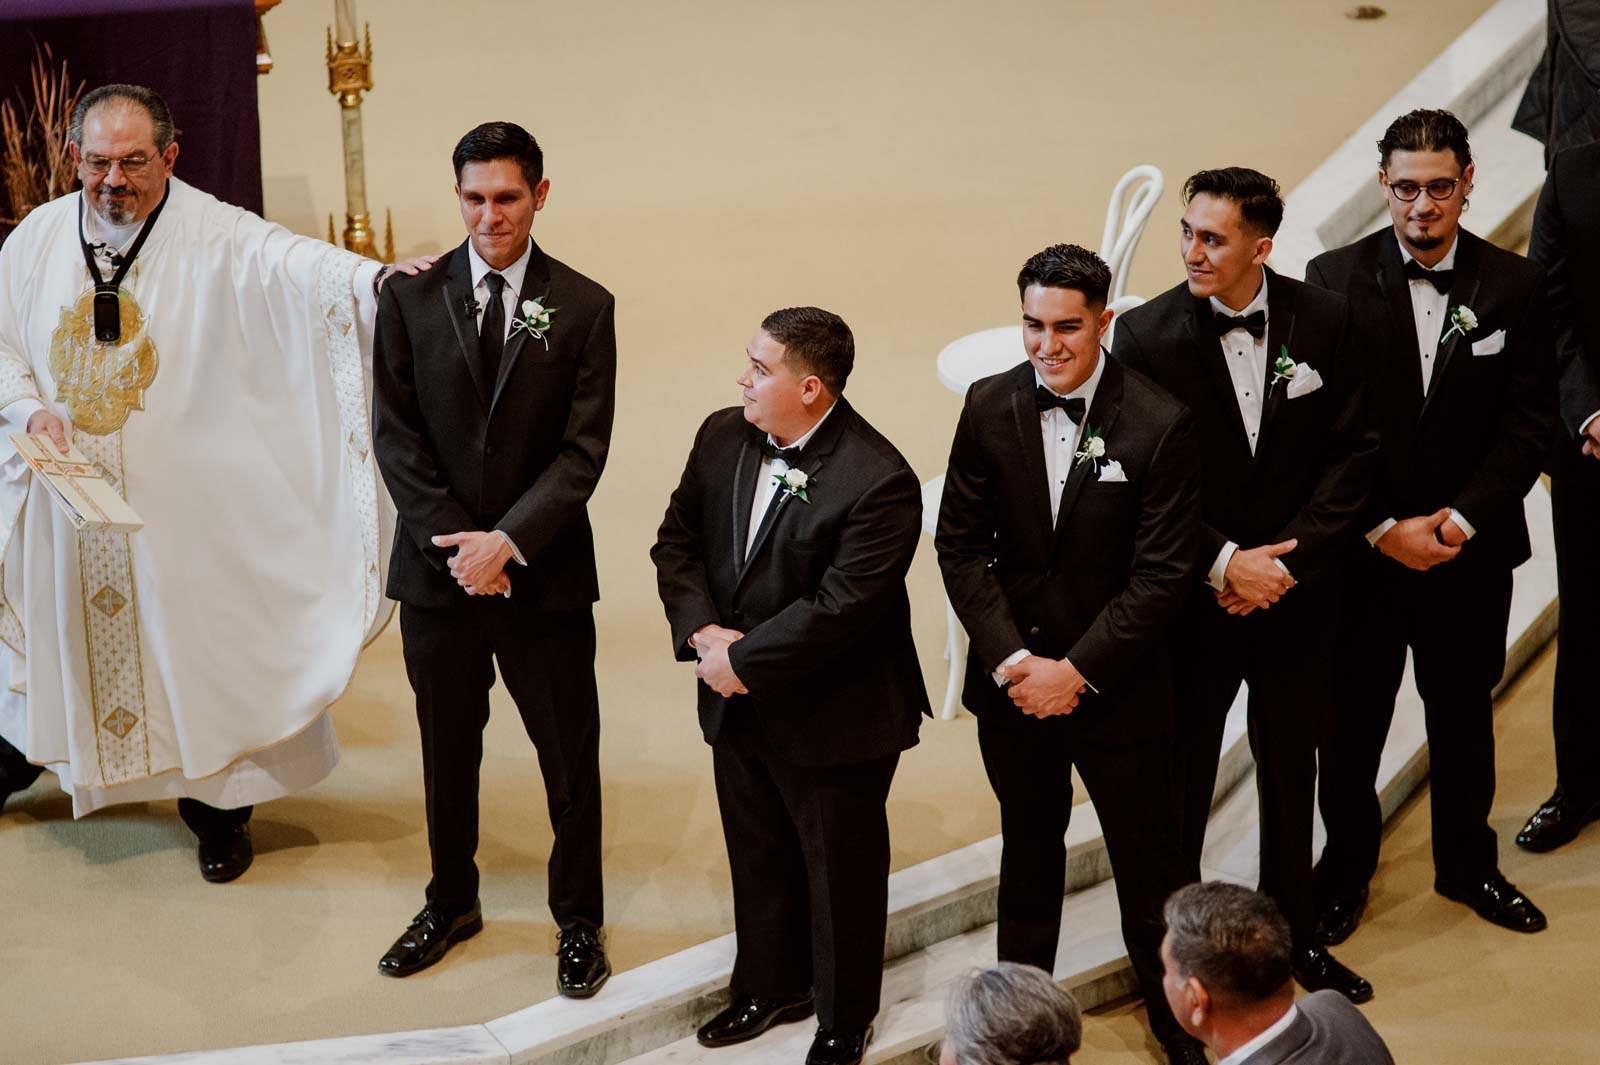 In a cheerful moment the groom is his pride for the first time and the priest rest his hands on his shoulder reassuring him that all is well and a moment of camaraderie